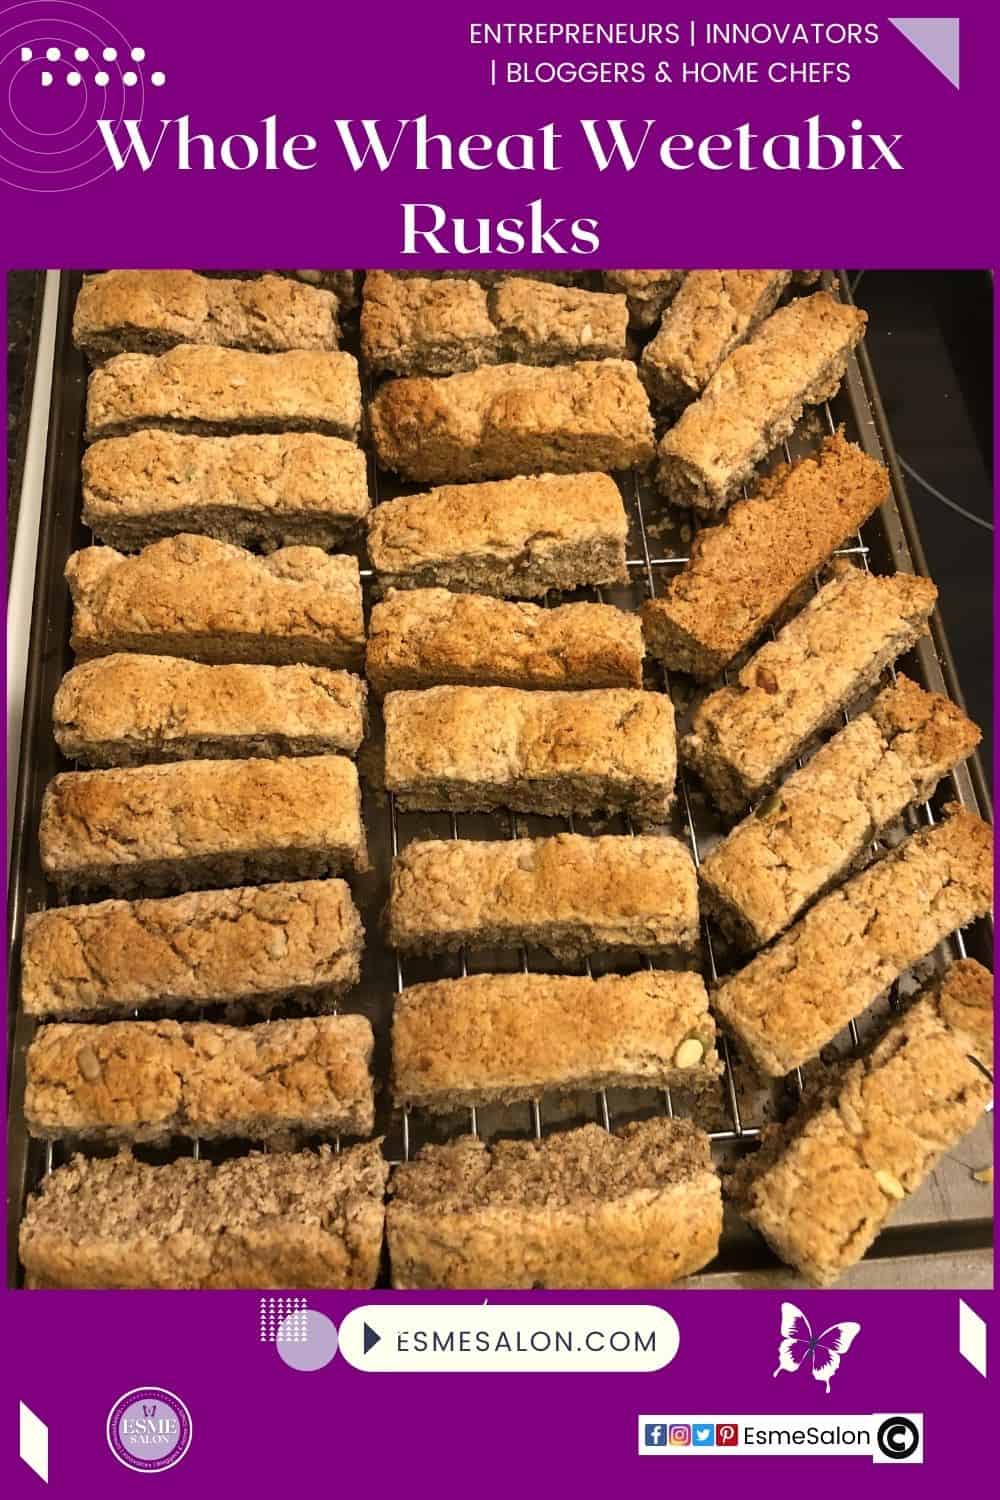 an image of a baking tray filled with Whole Wheat Weetabix Rusks ready to be dried out